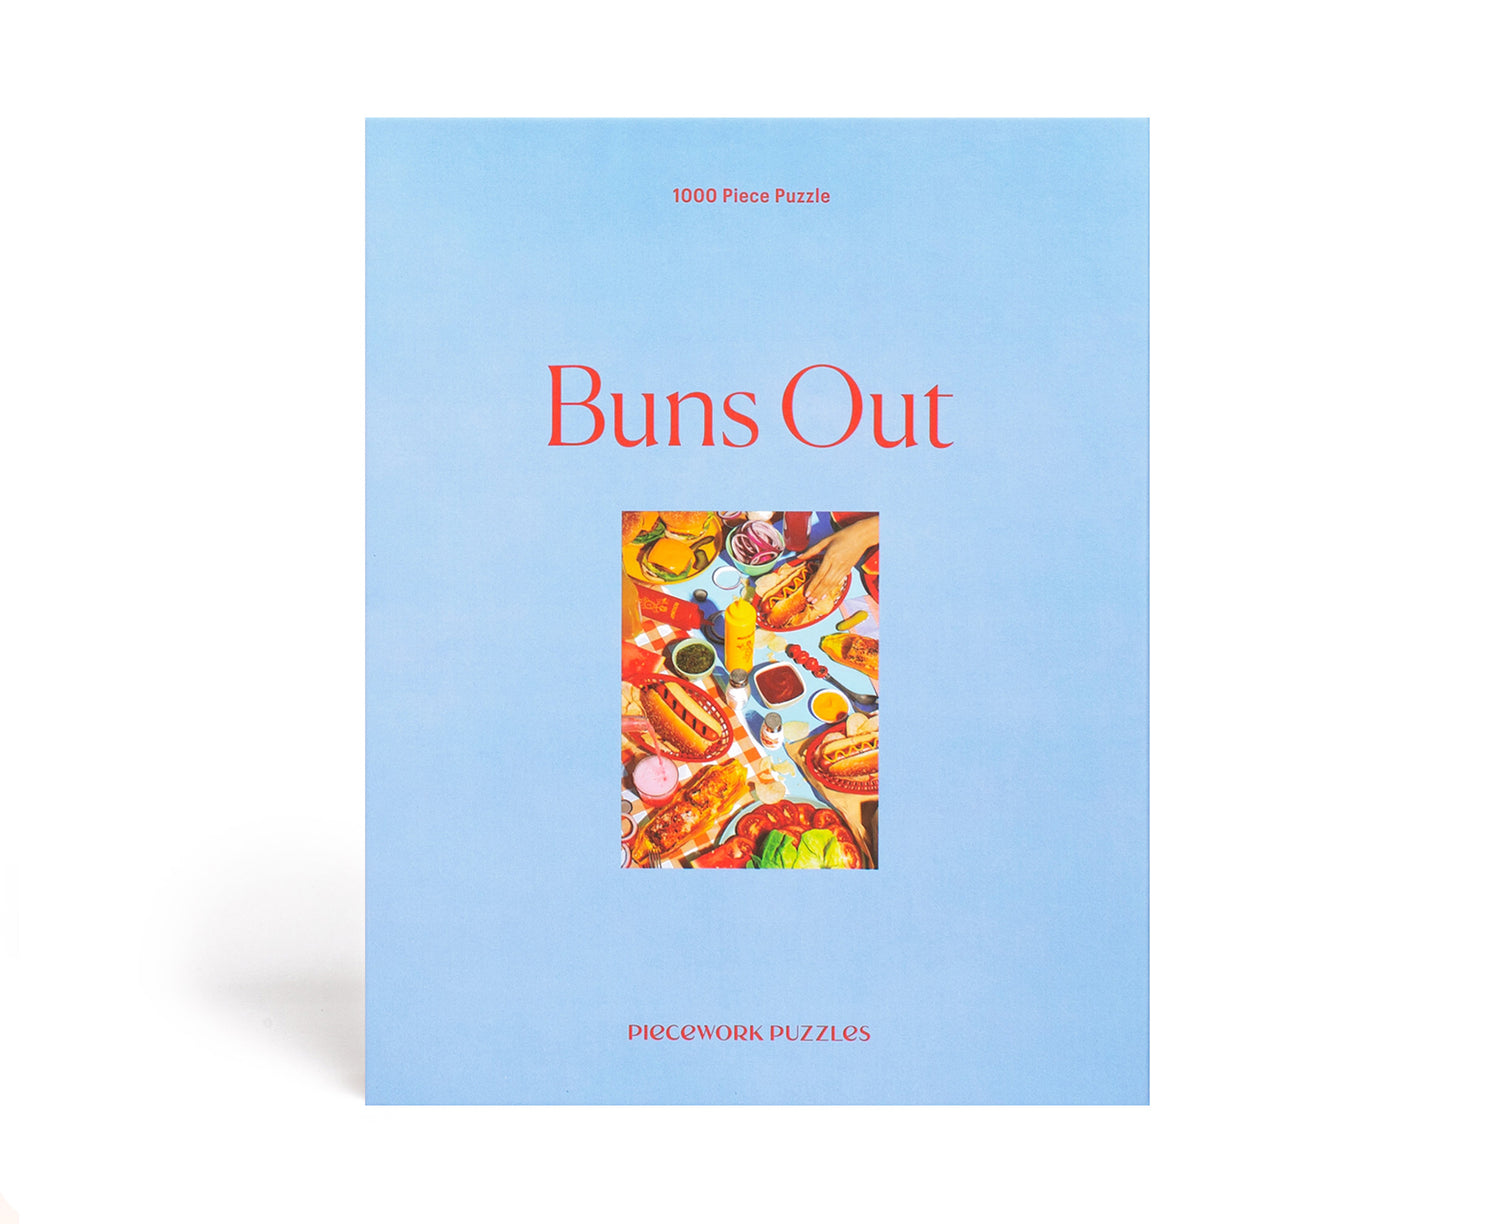 1000-Piece Puzzle - Buns Out - by Piecework